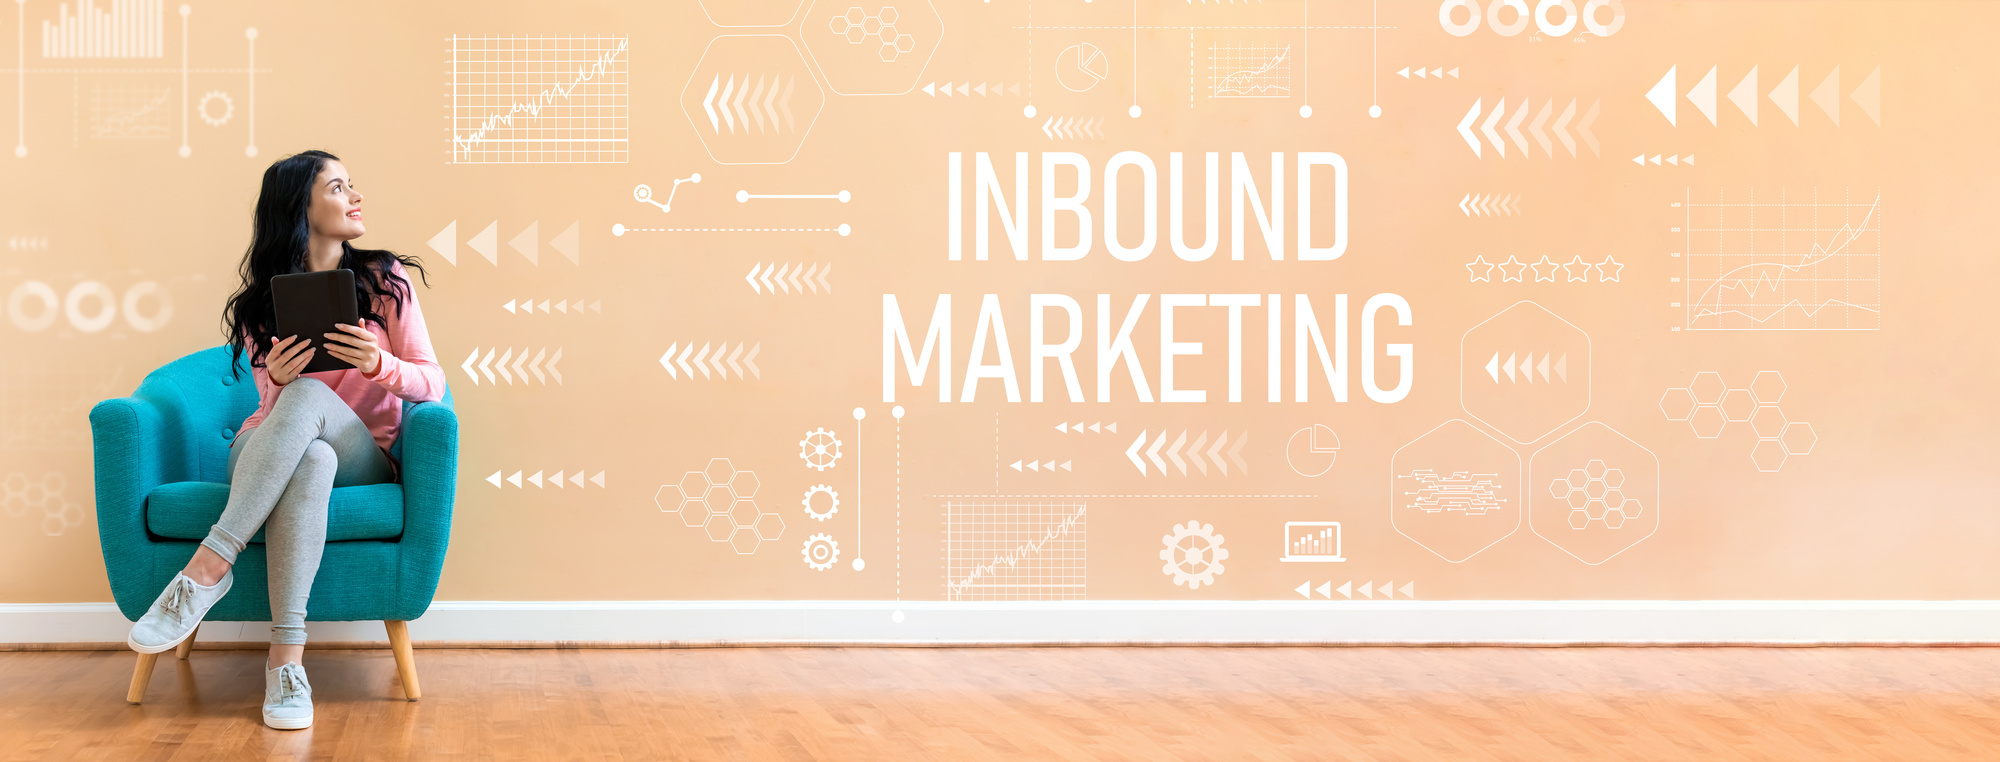 Inbound marketing with woman using a tablet